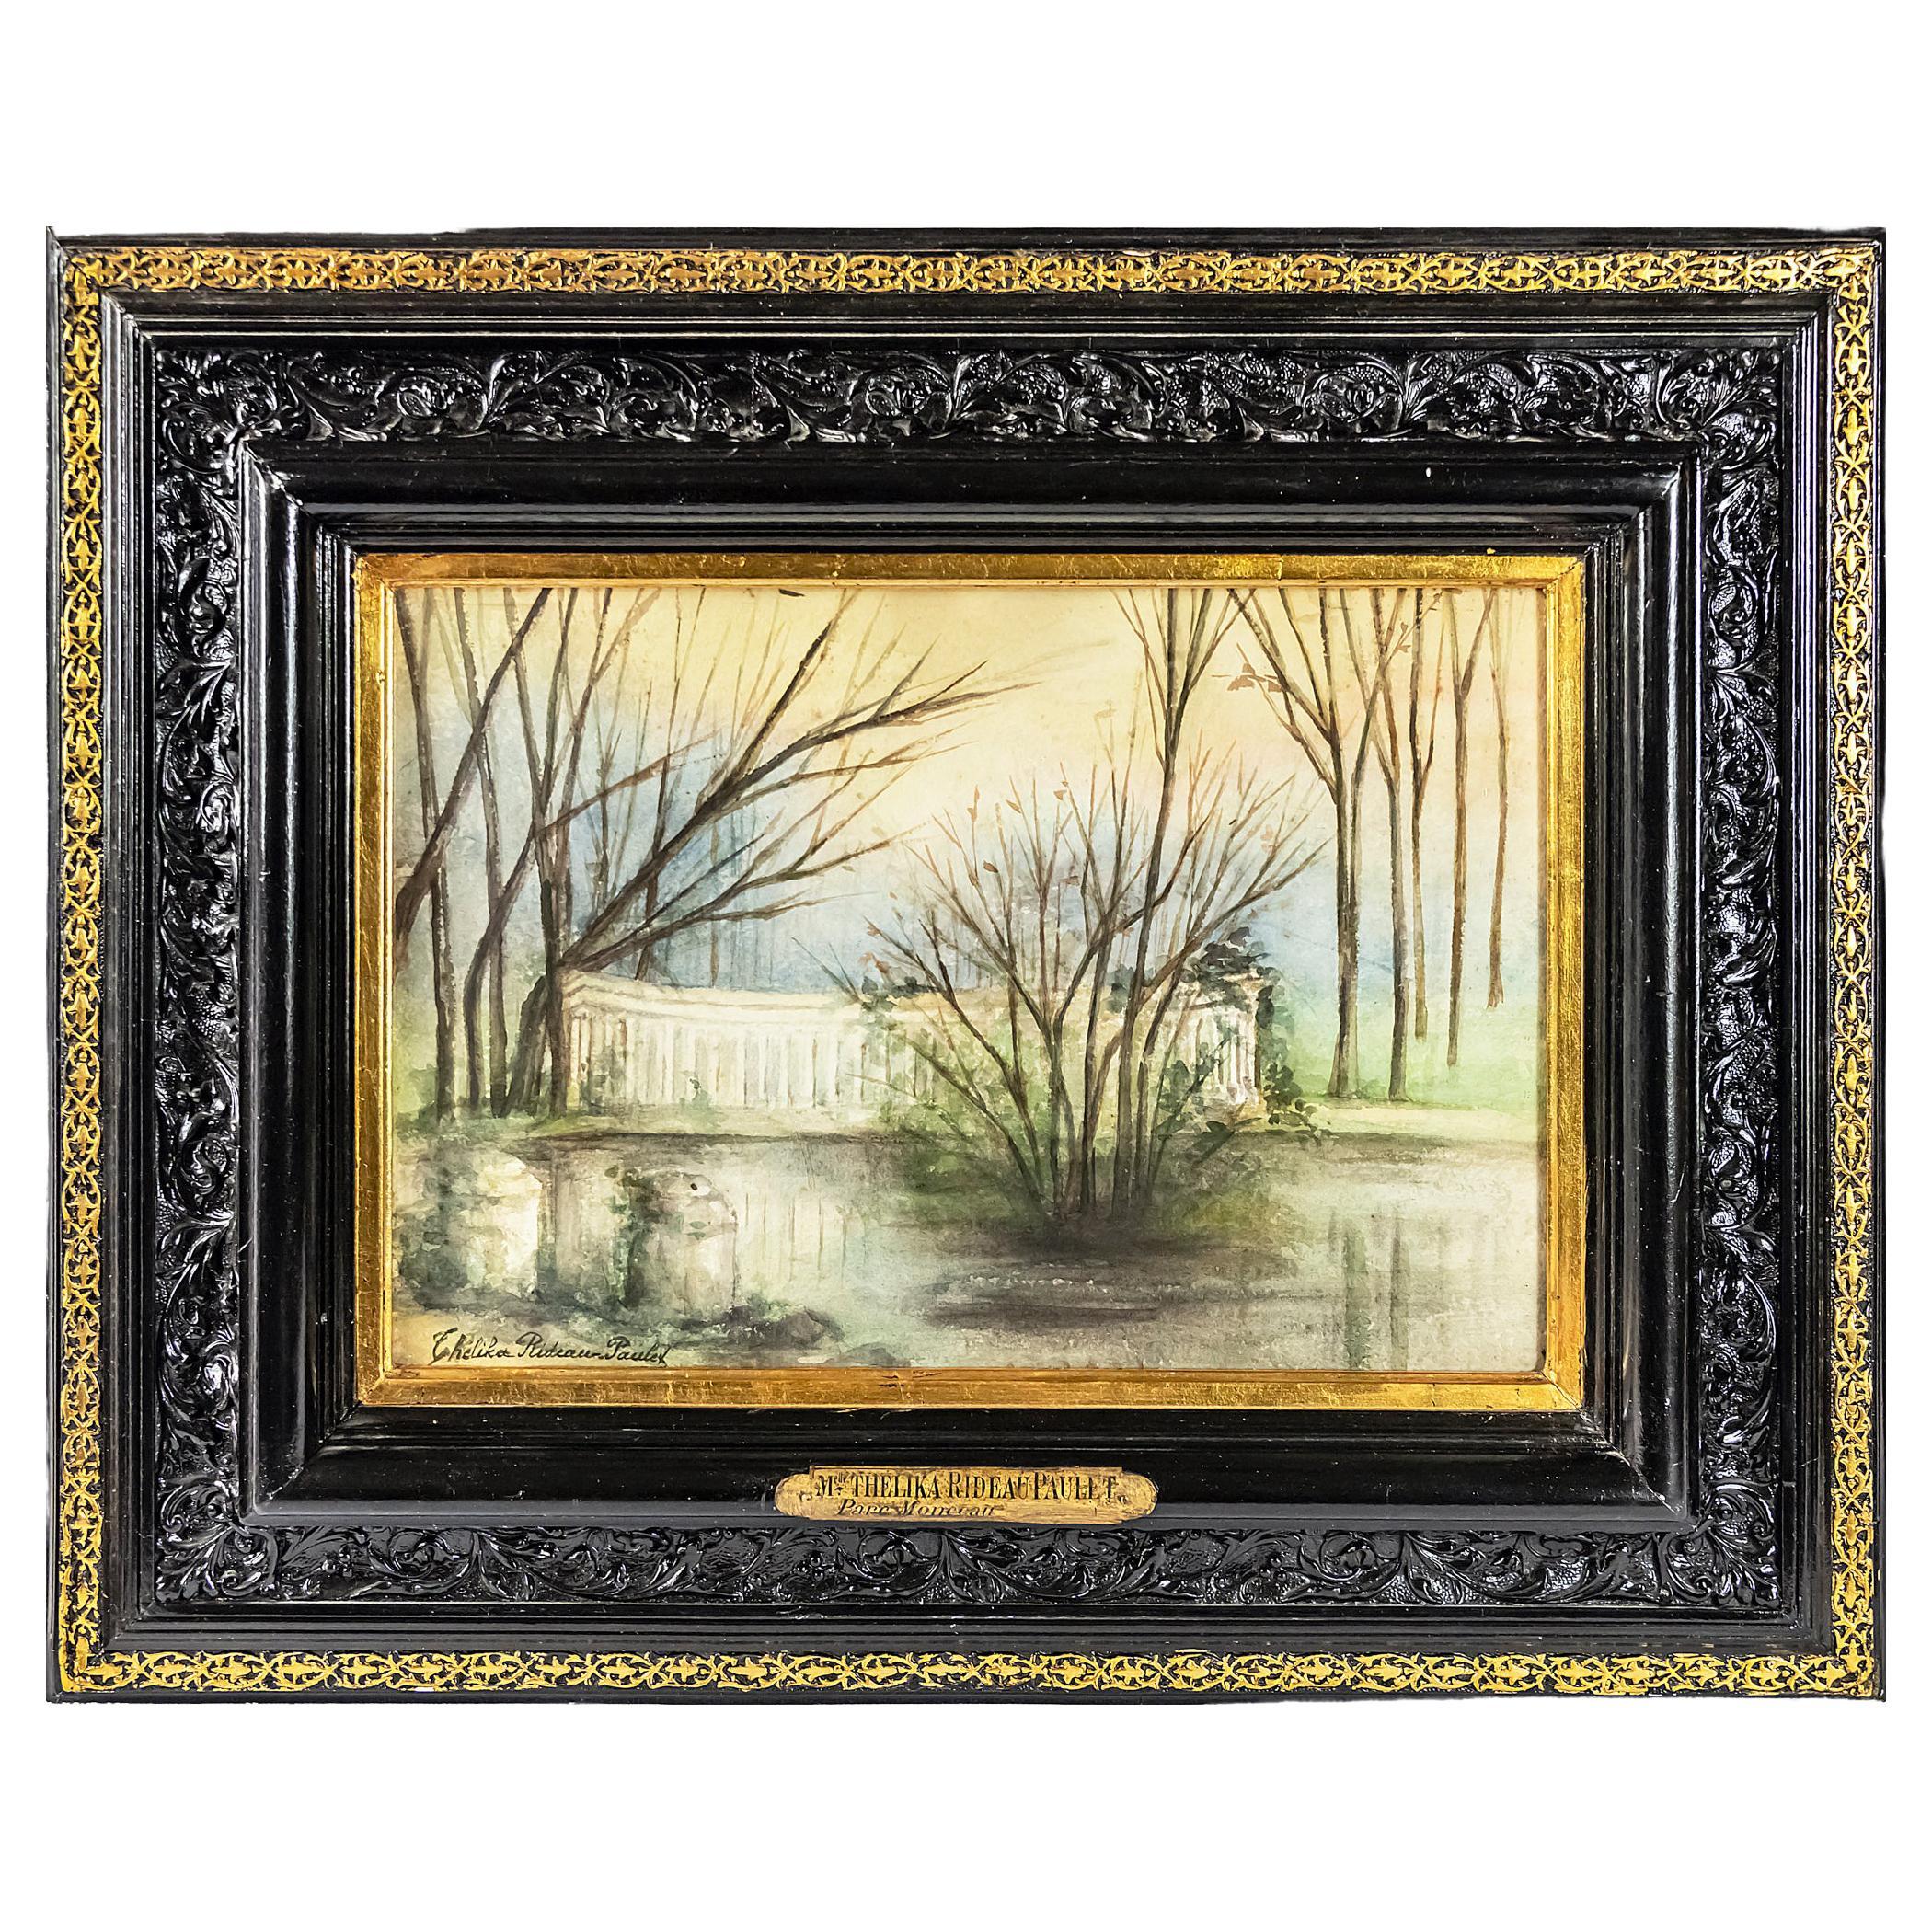 Framed French 19th Century Painting by Marie Thelika Rideau Paulet For Sale